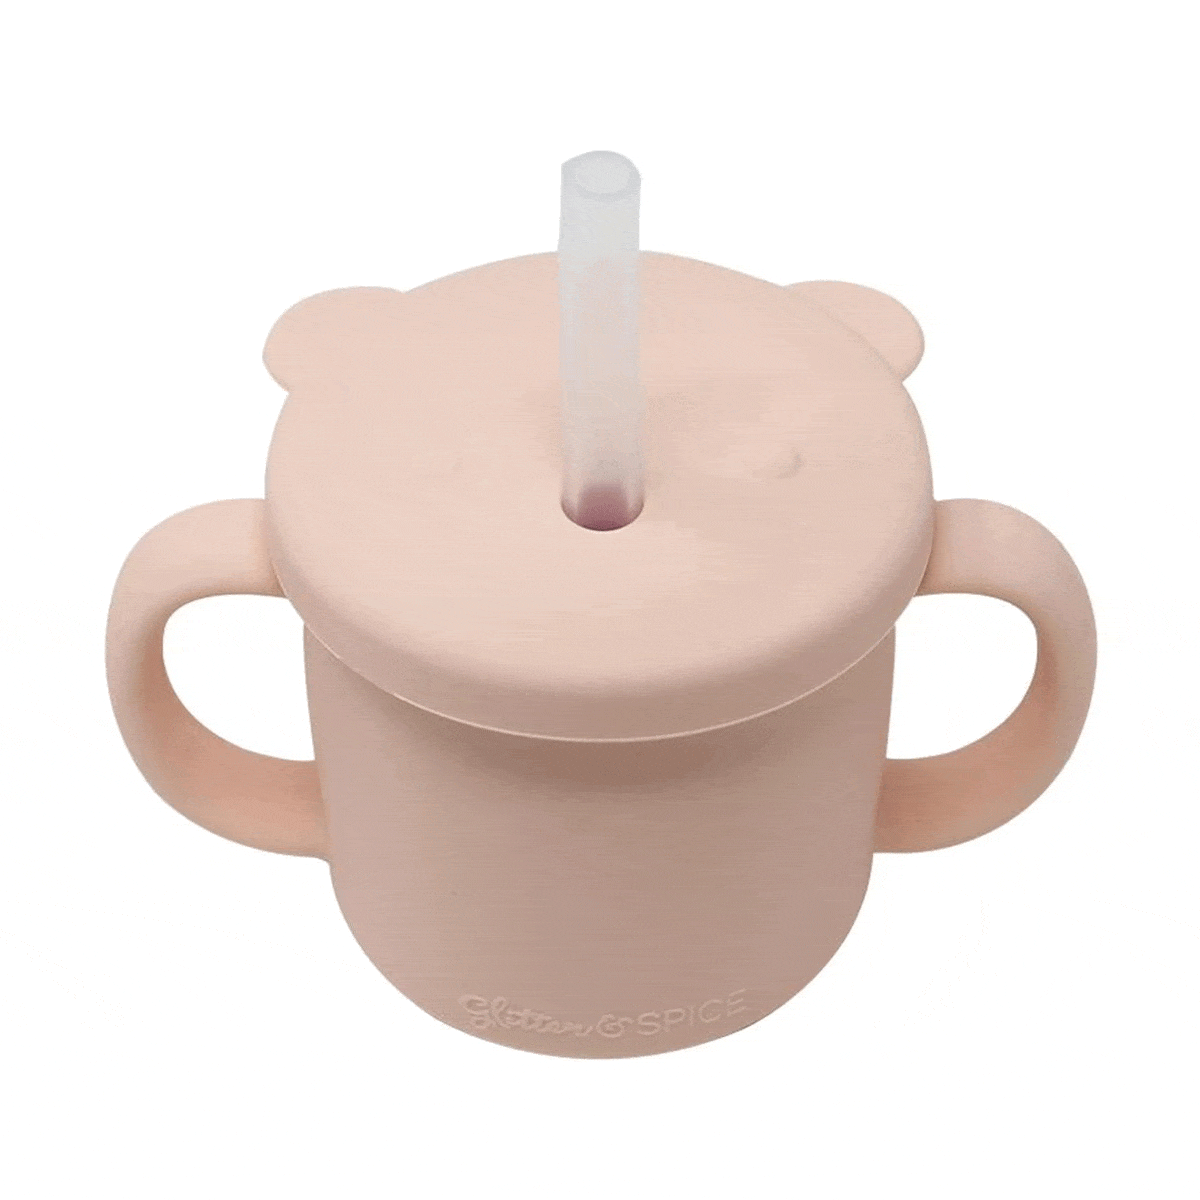 Glitter & Spice silicone straw cup Glitter & Spice Grow With Me Silicone Bear Cup - Blush